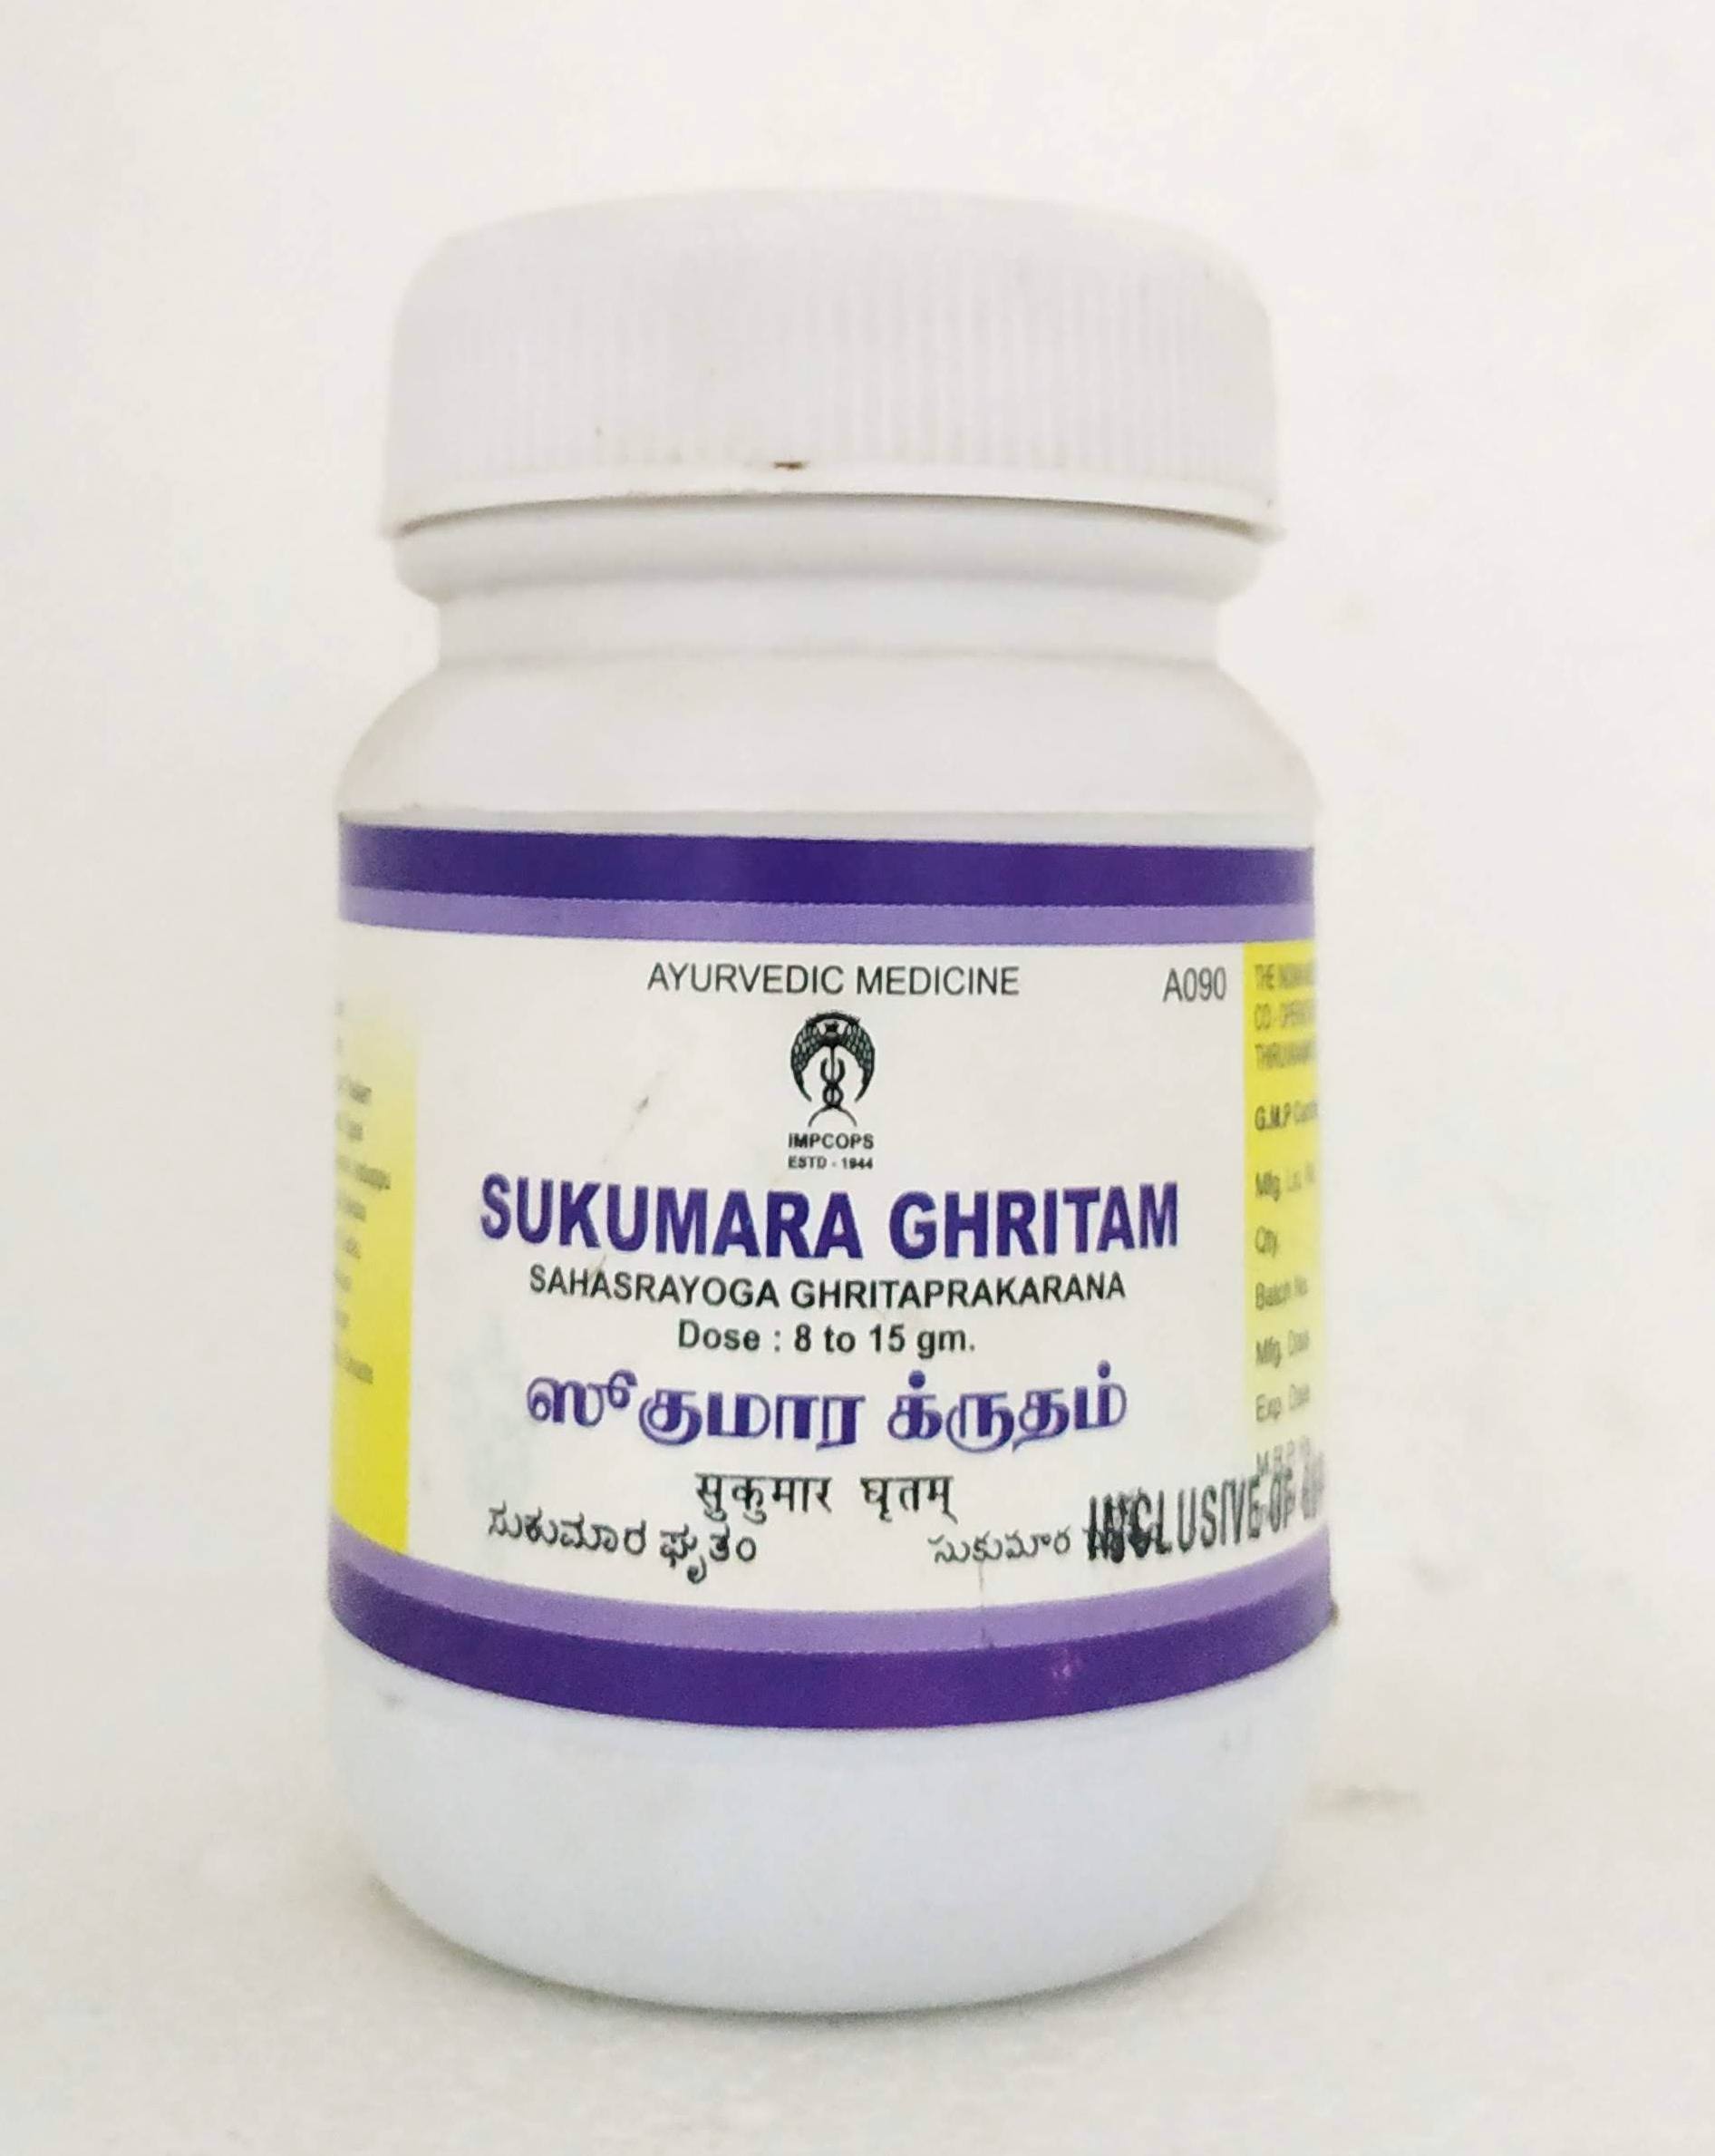 Shop Sukumara ghrutham 100gm at price 343.00 from Impcops Online - Ayush Care